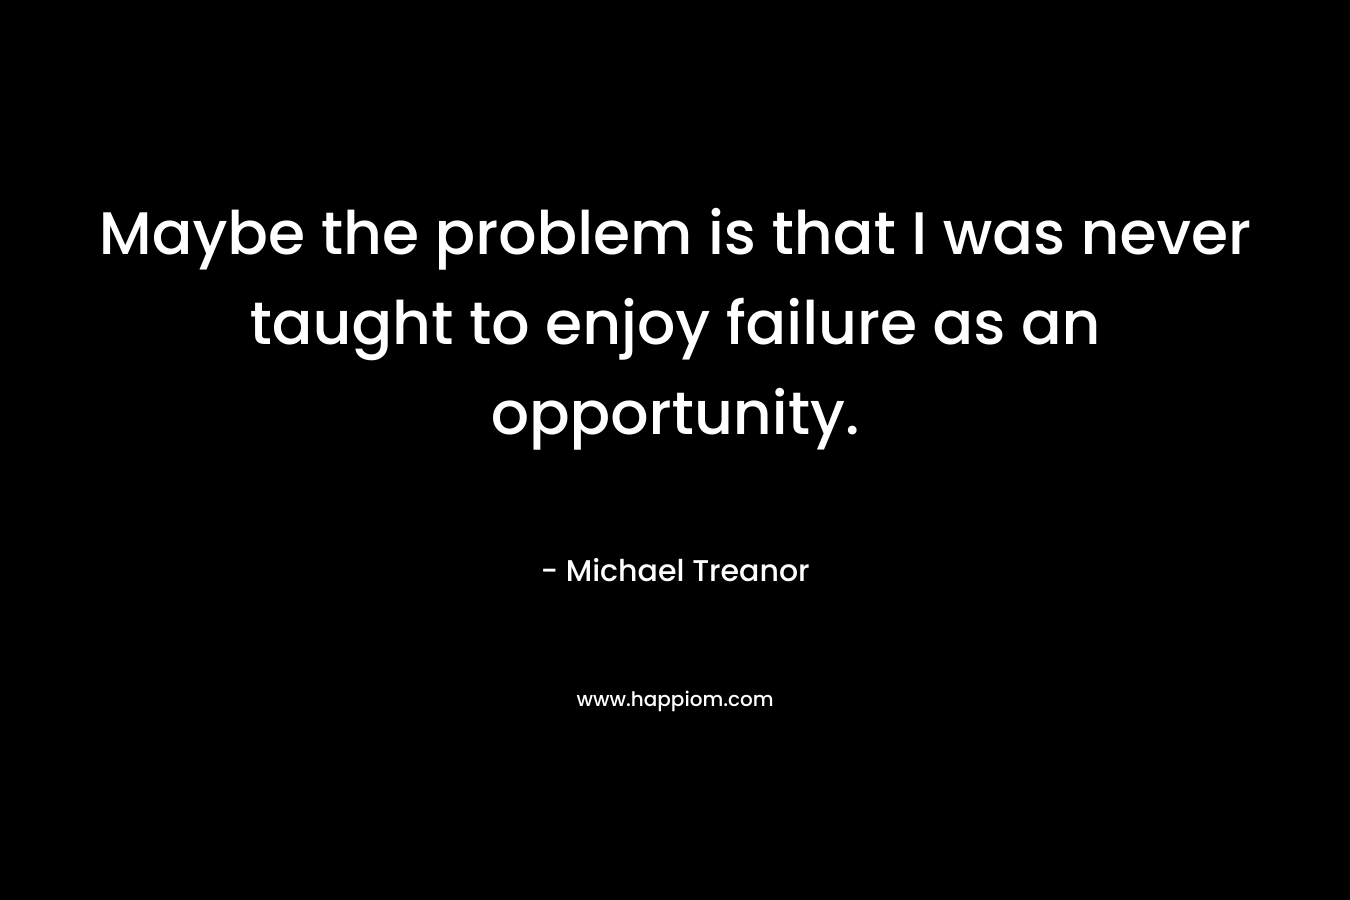 Maybe the problem is that I was never taught to enjoy failure as an opportunity. – Michael Treanor